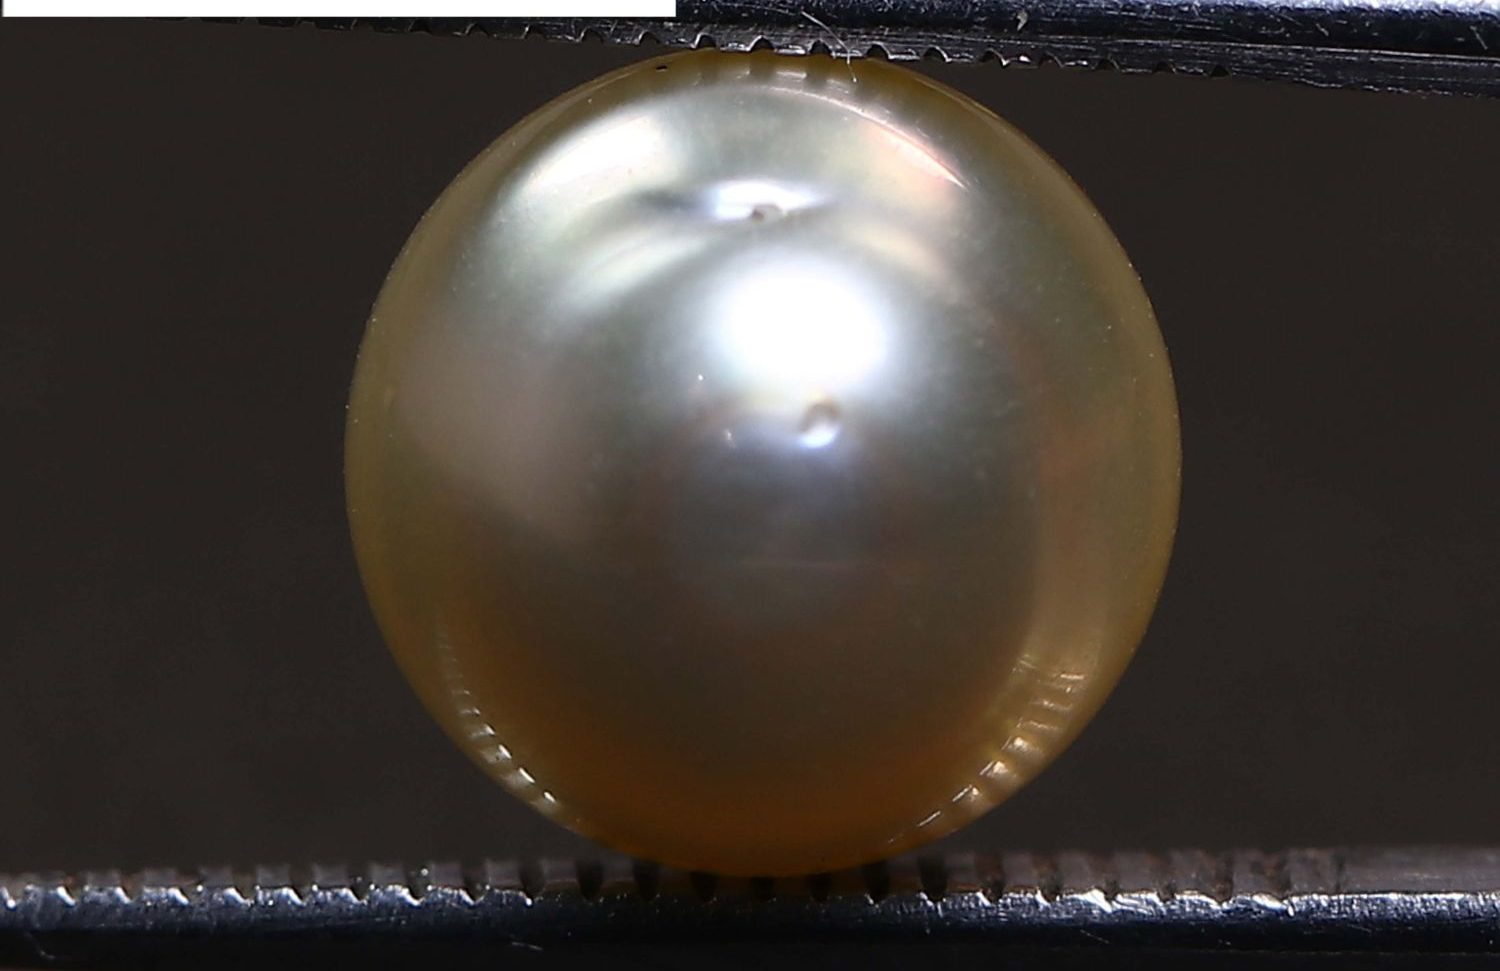 PEARL 5.23 Ct.